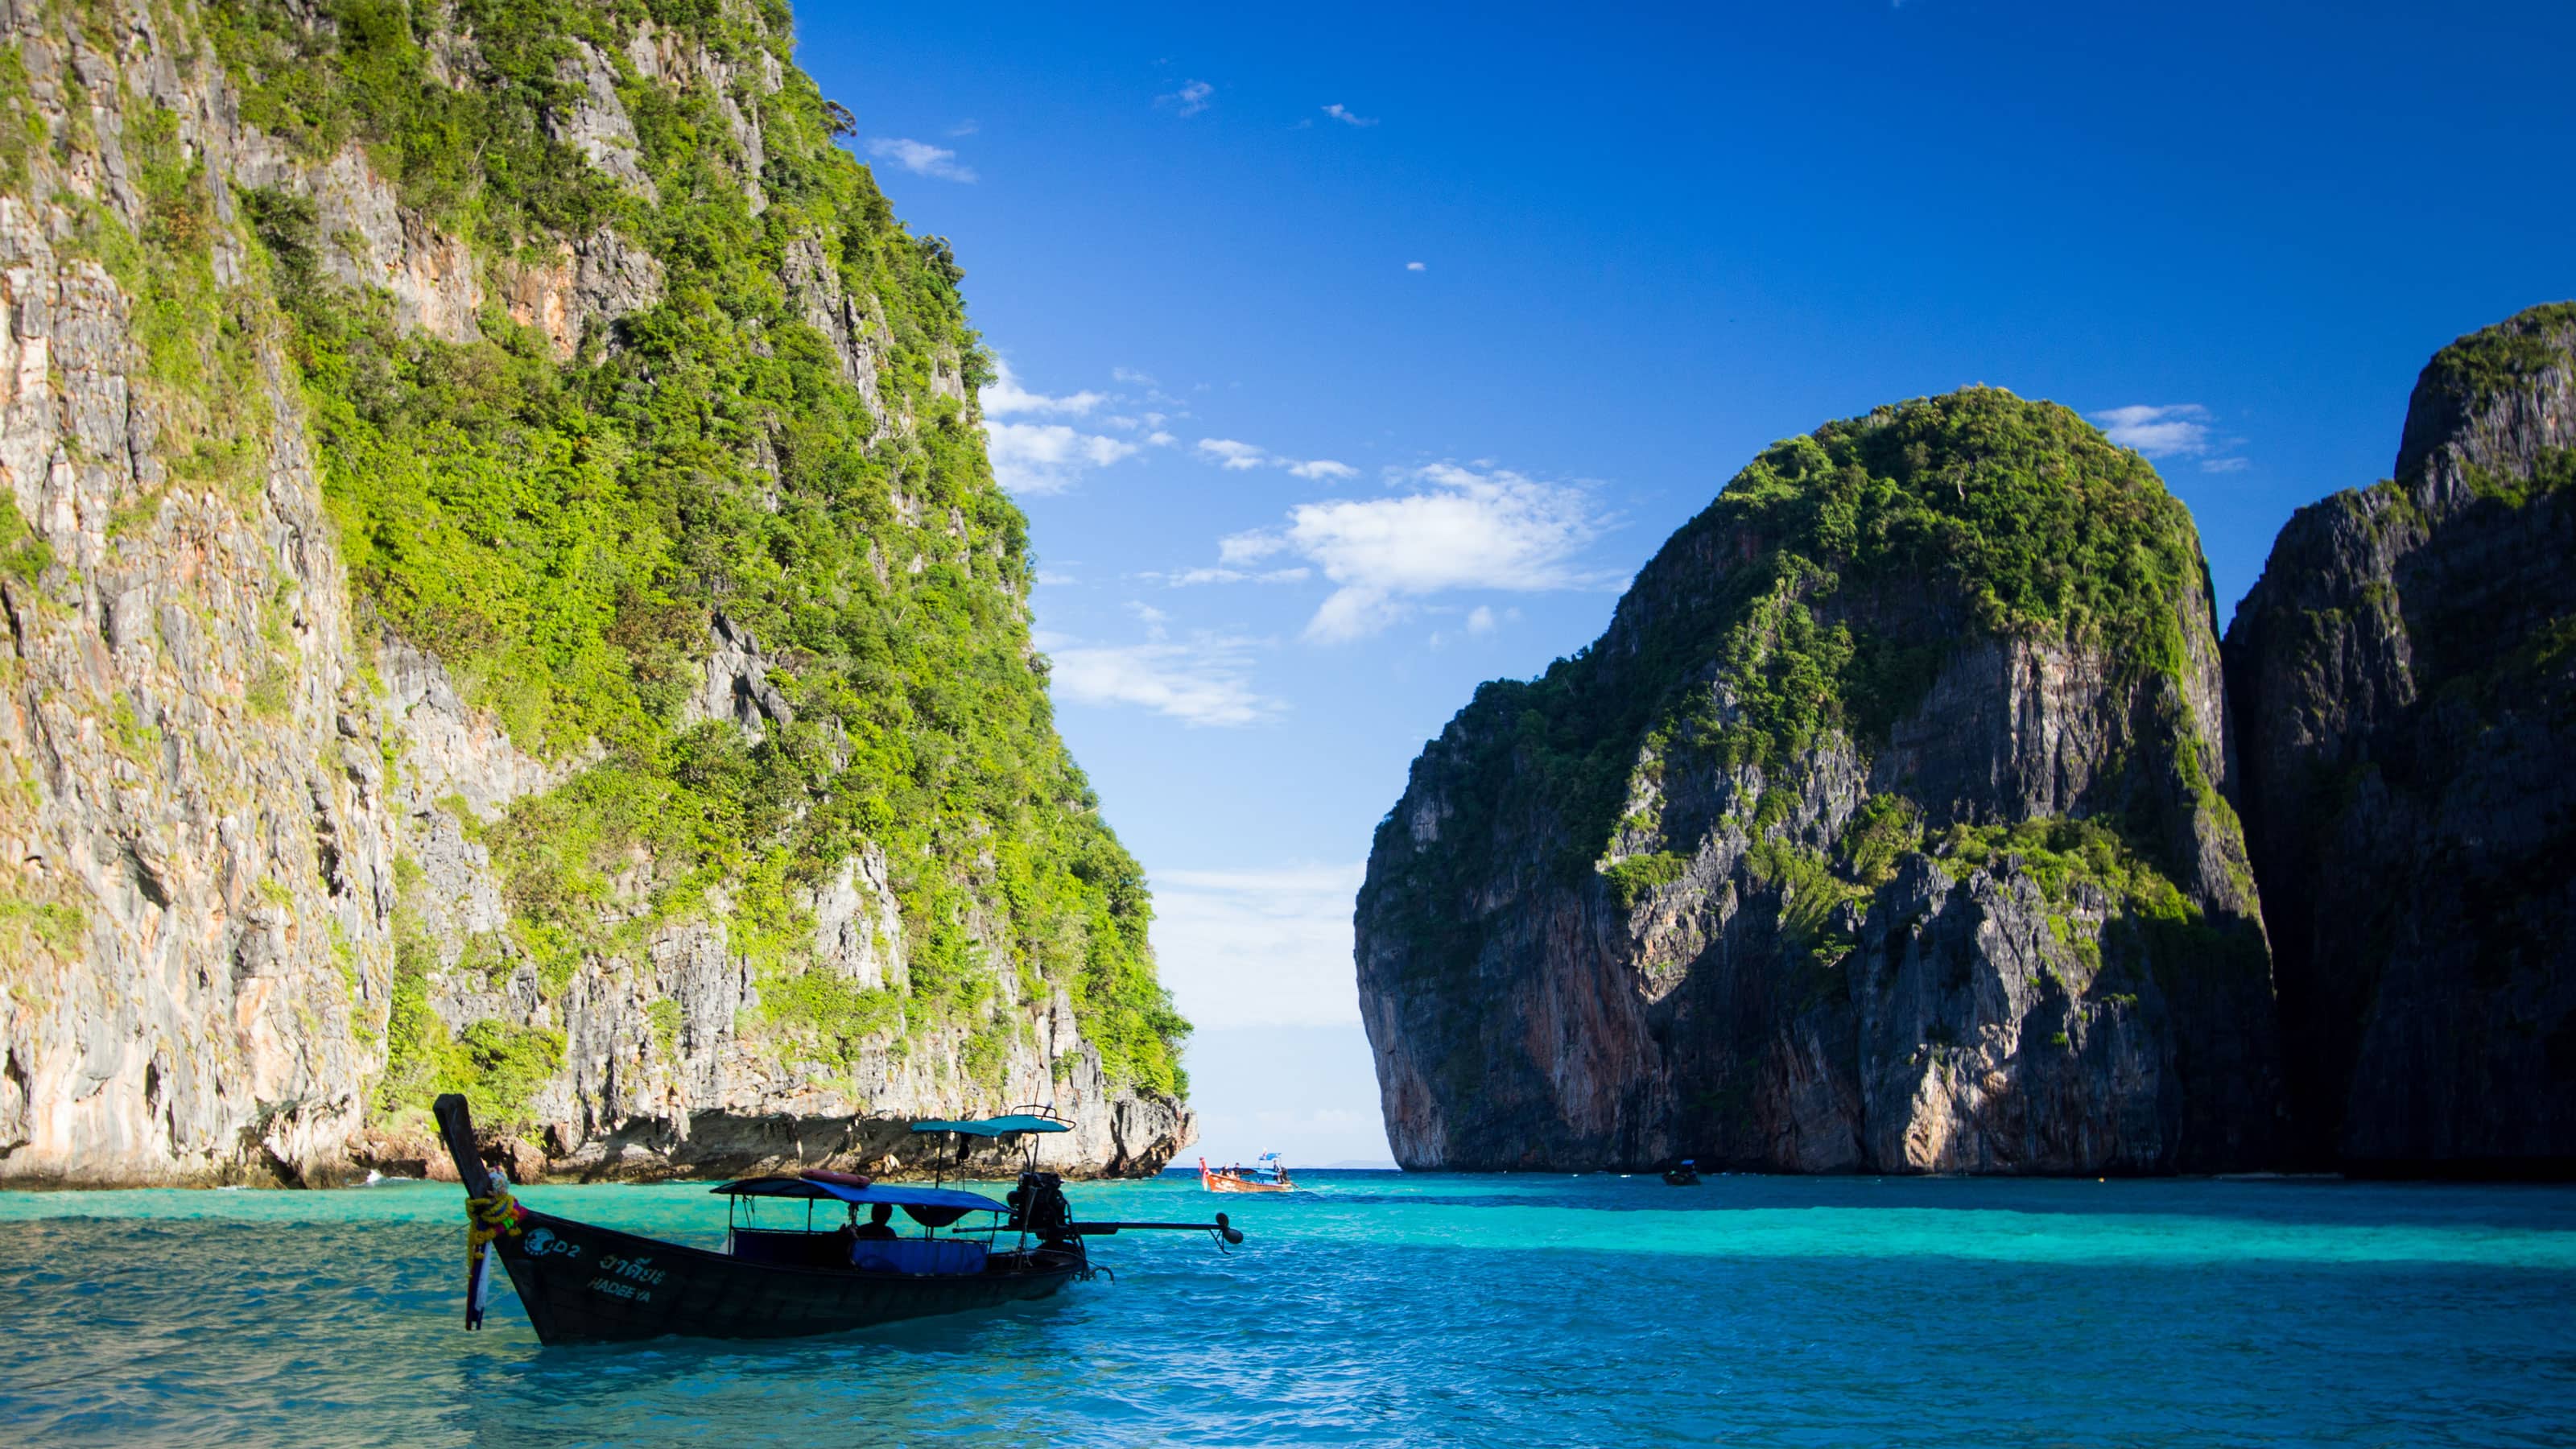 Boating from Patong in Phuket to James Bond Island